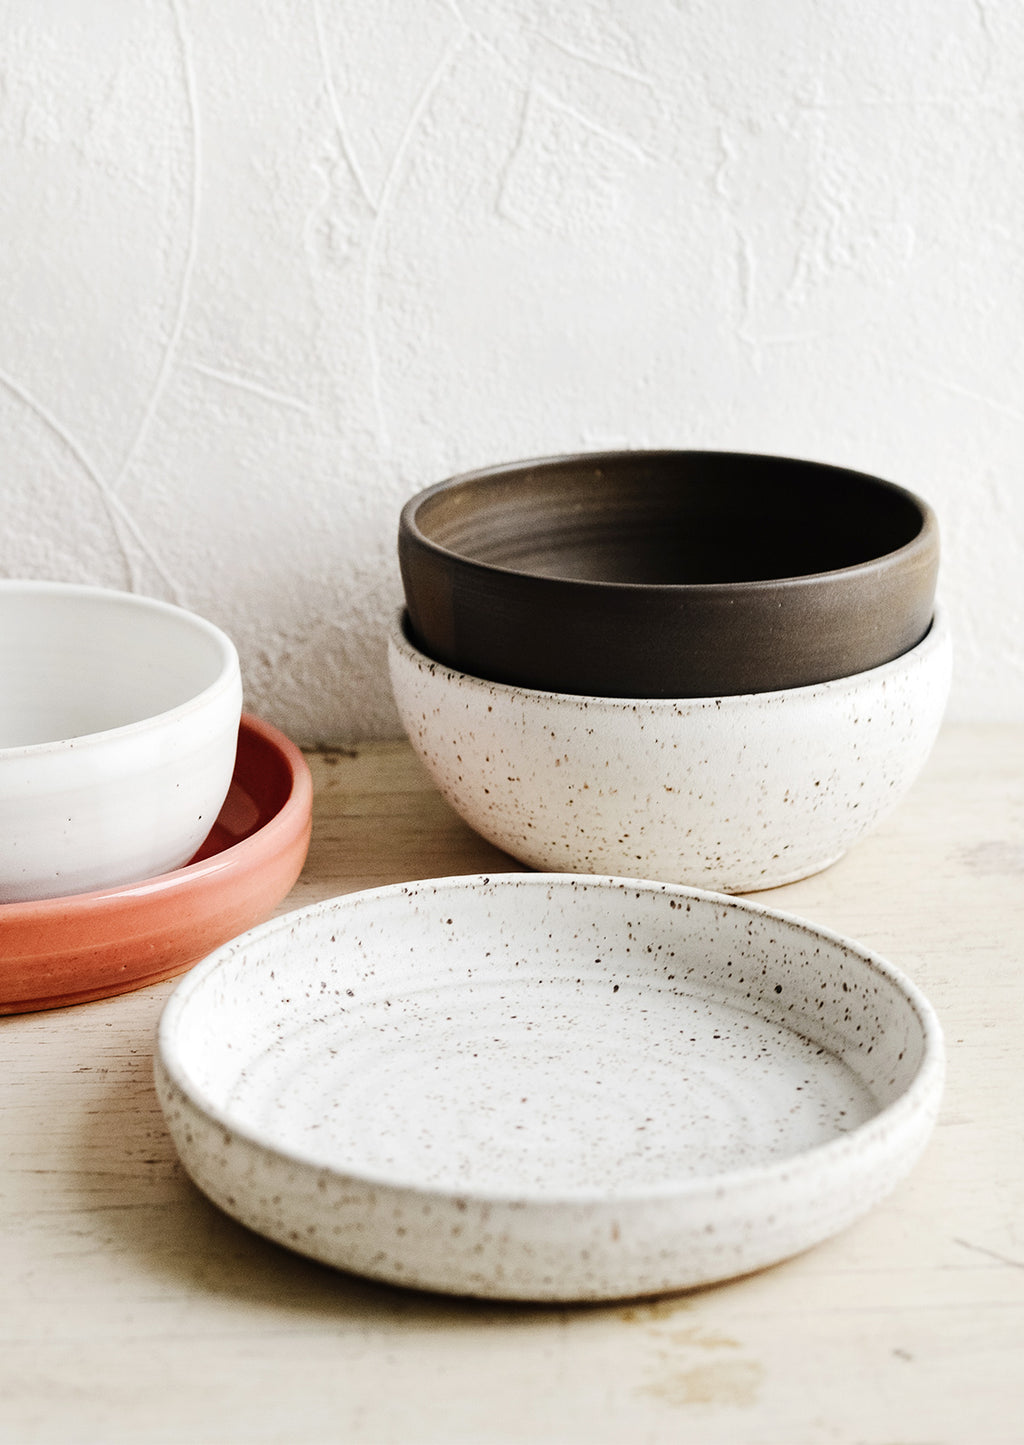 Speckled White / Noodle Bowl: A collection of handmade ceramic bowls in various colors and sizes.